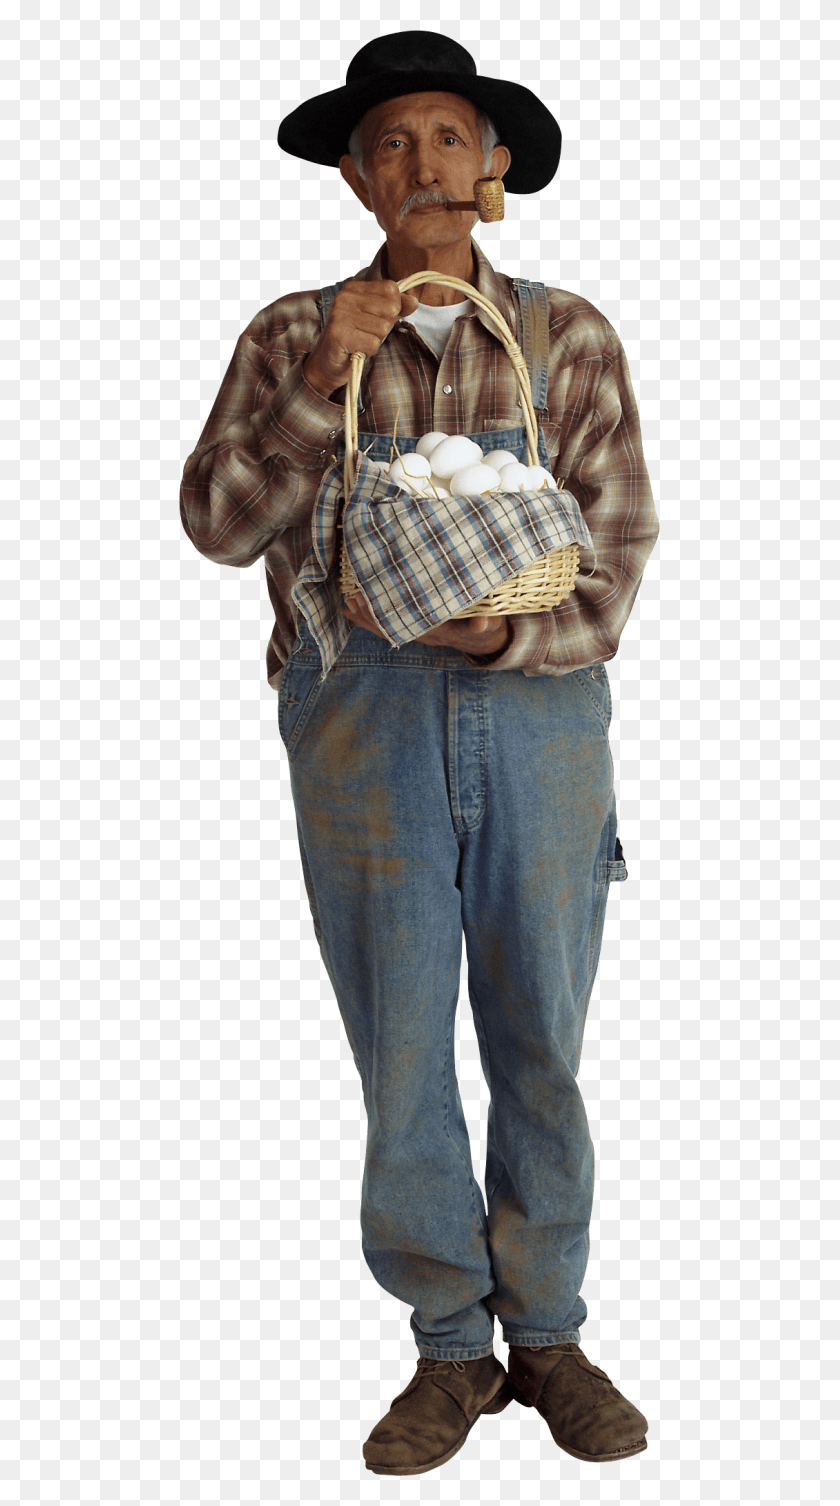 481x1446 Farmer Images Background Angry Farmer Transparente, Pantalones, Ropa, Vestimenta Hd Png